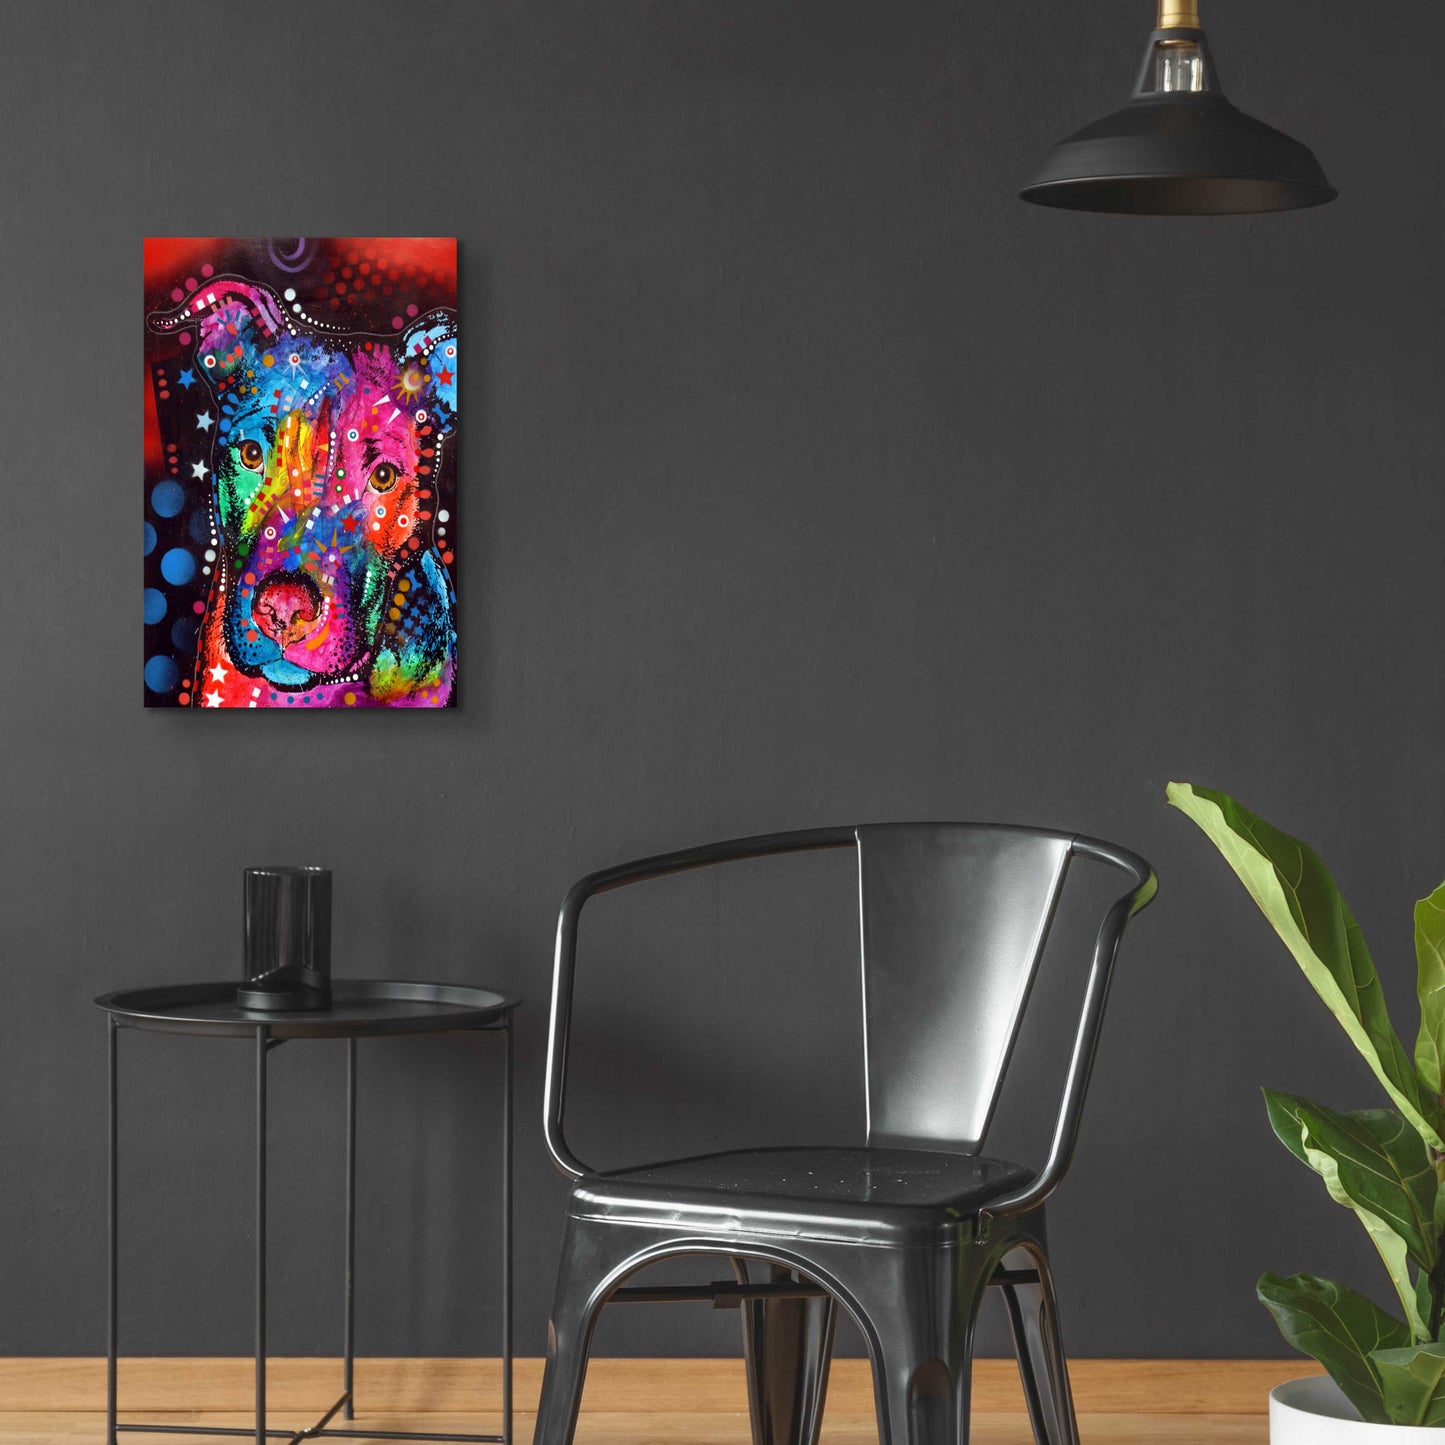 Epic Art 'Young Bull 120610' by Dean Russo, Acrylic Glass Wall Art,16x24